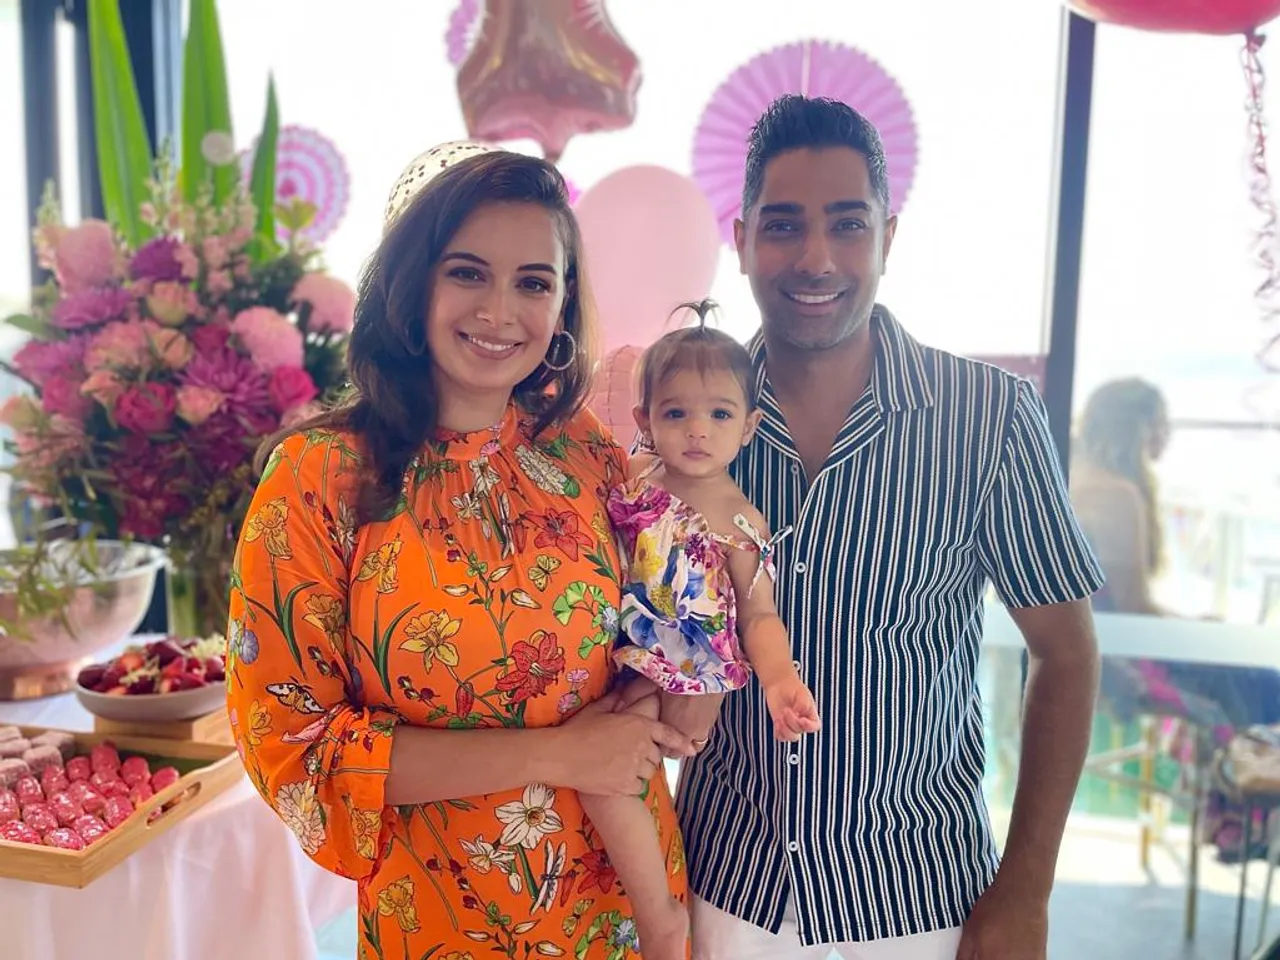 Evelyn Sharma reveals daughters face for the first time in this beautiful photo of Ava’s first birthday!